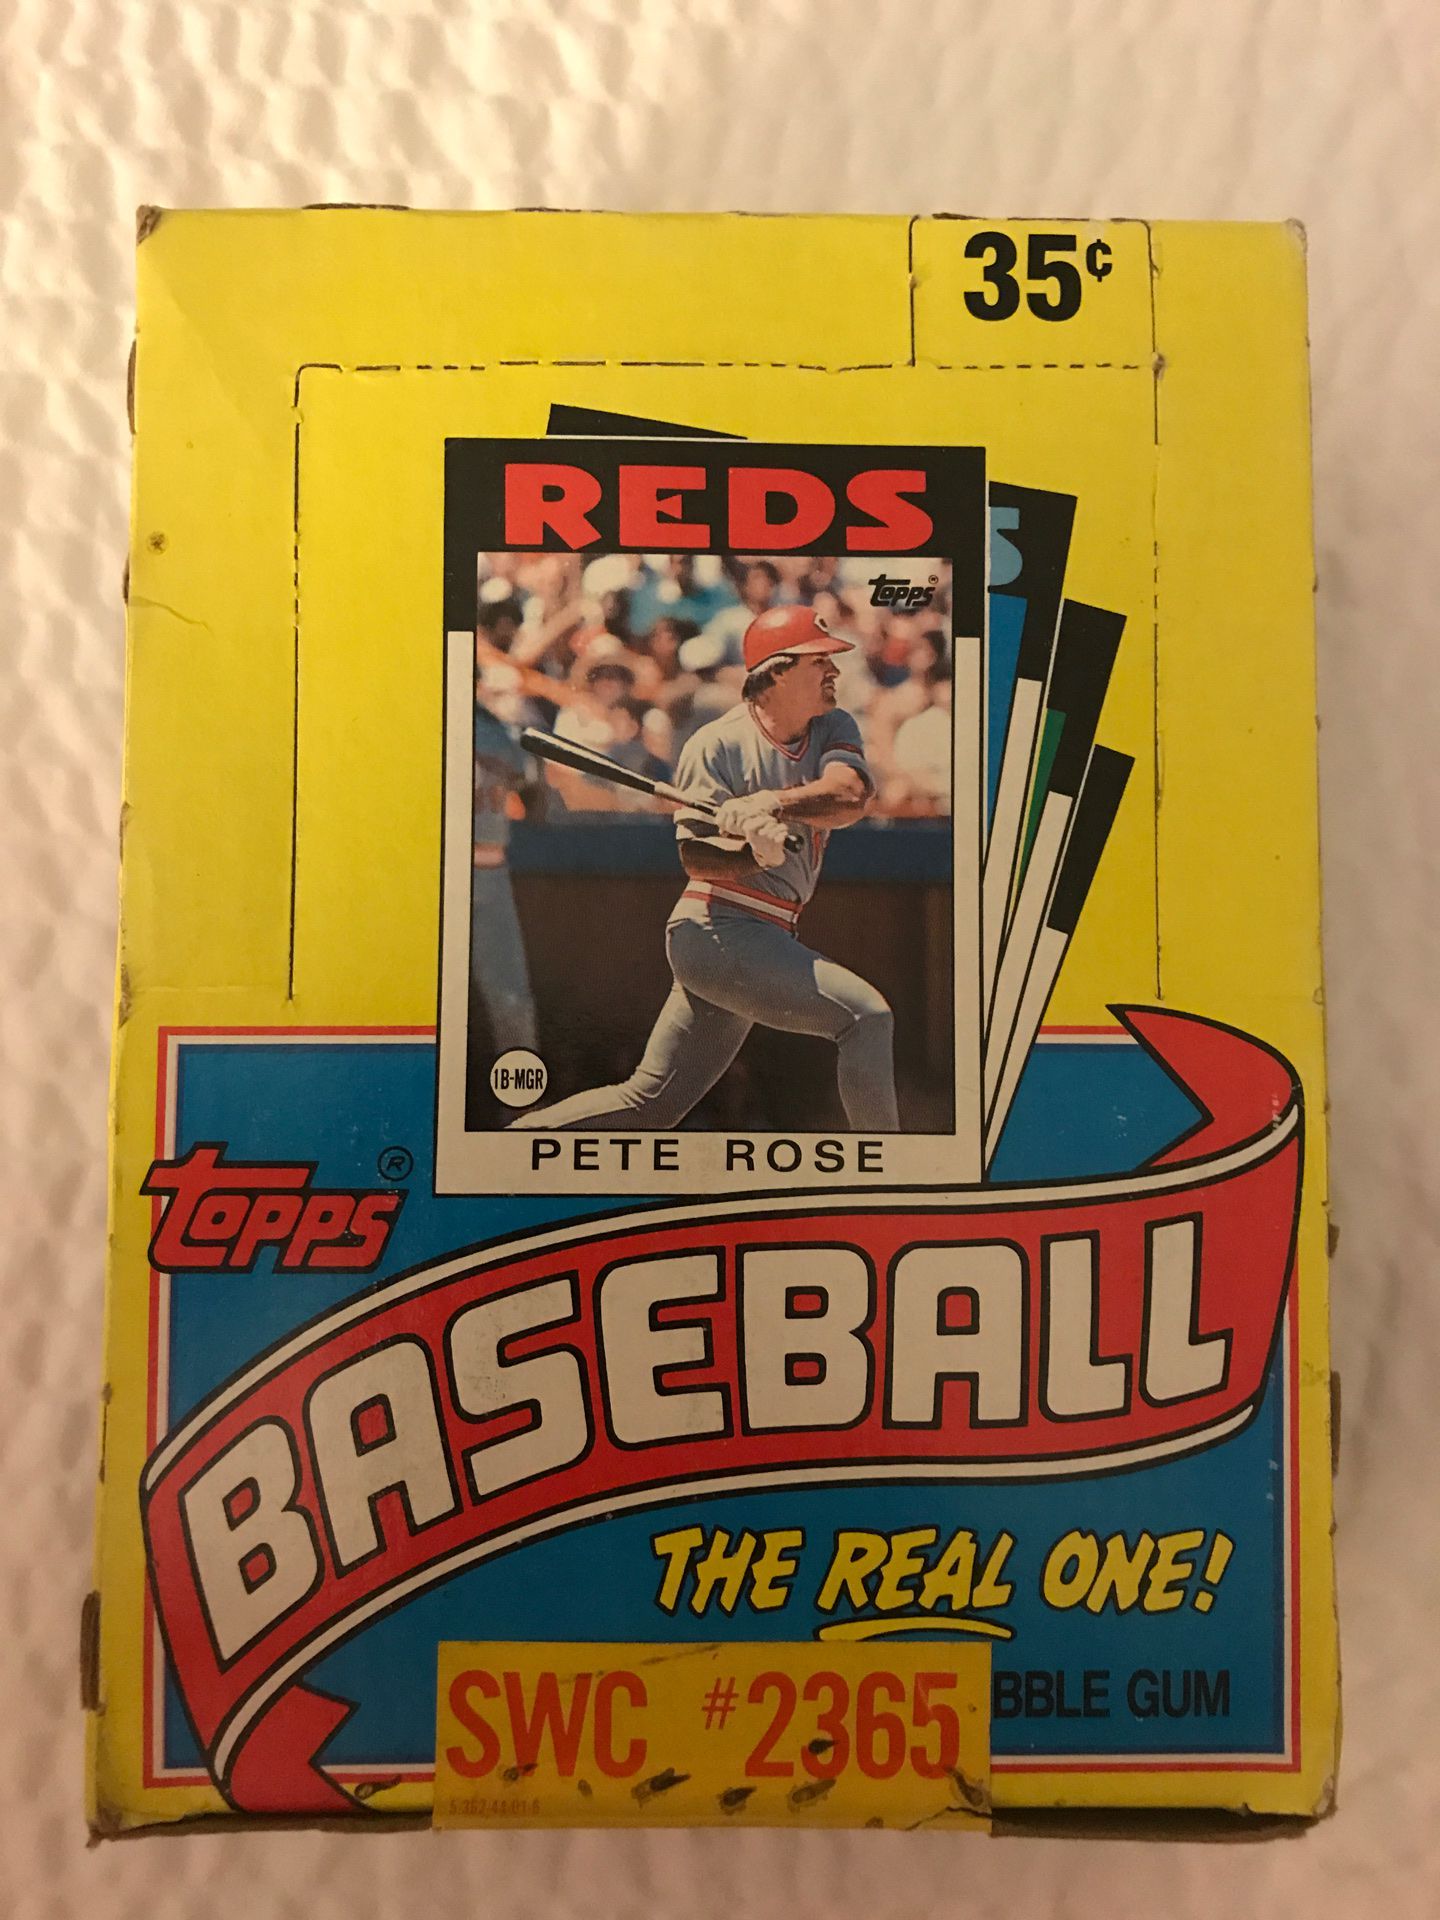 Sealed never opened 1986 Topps Wax Box